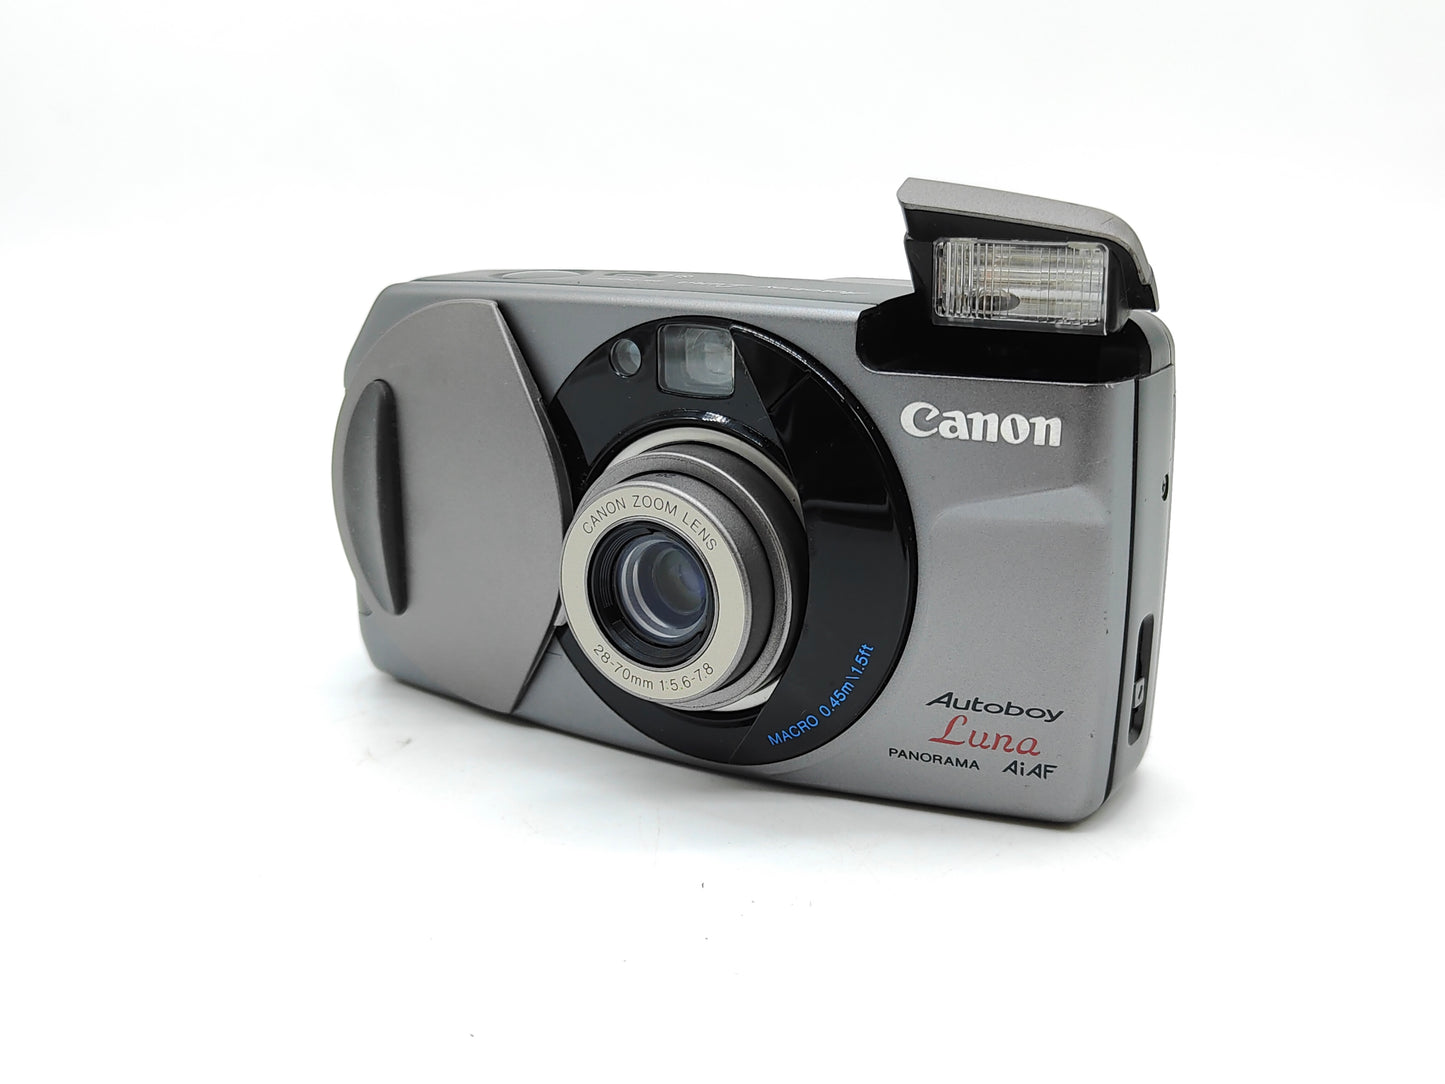 Canon Autoboy Luna point-and shoot film camera